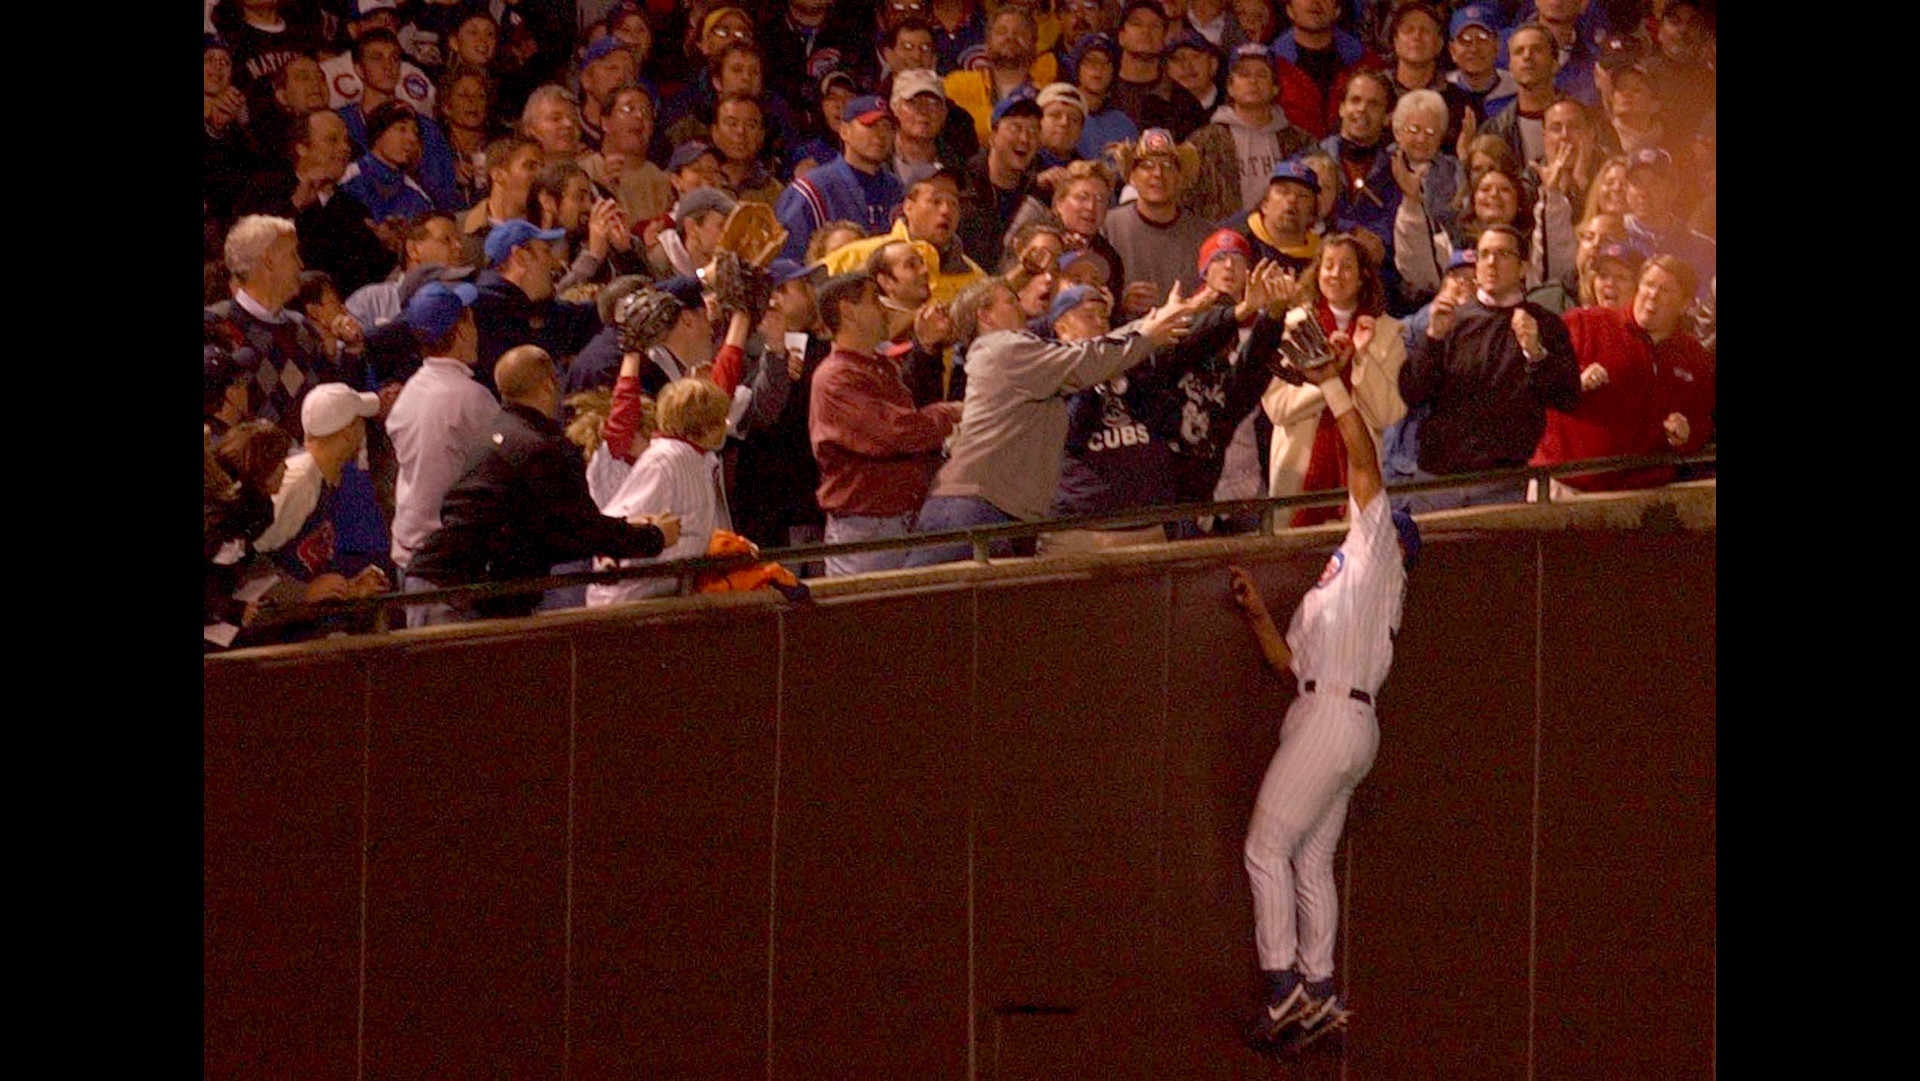 Steve Bartman gets a WS ring. Fantastic! Now let's move on